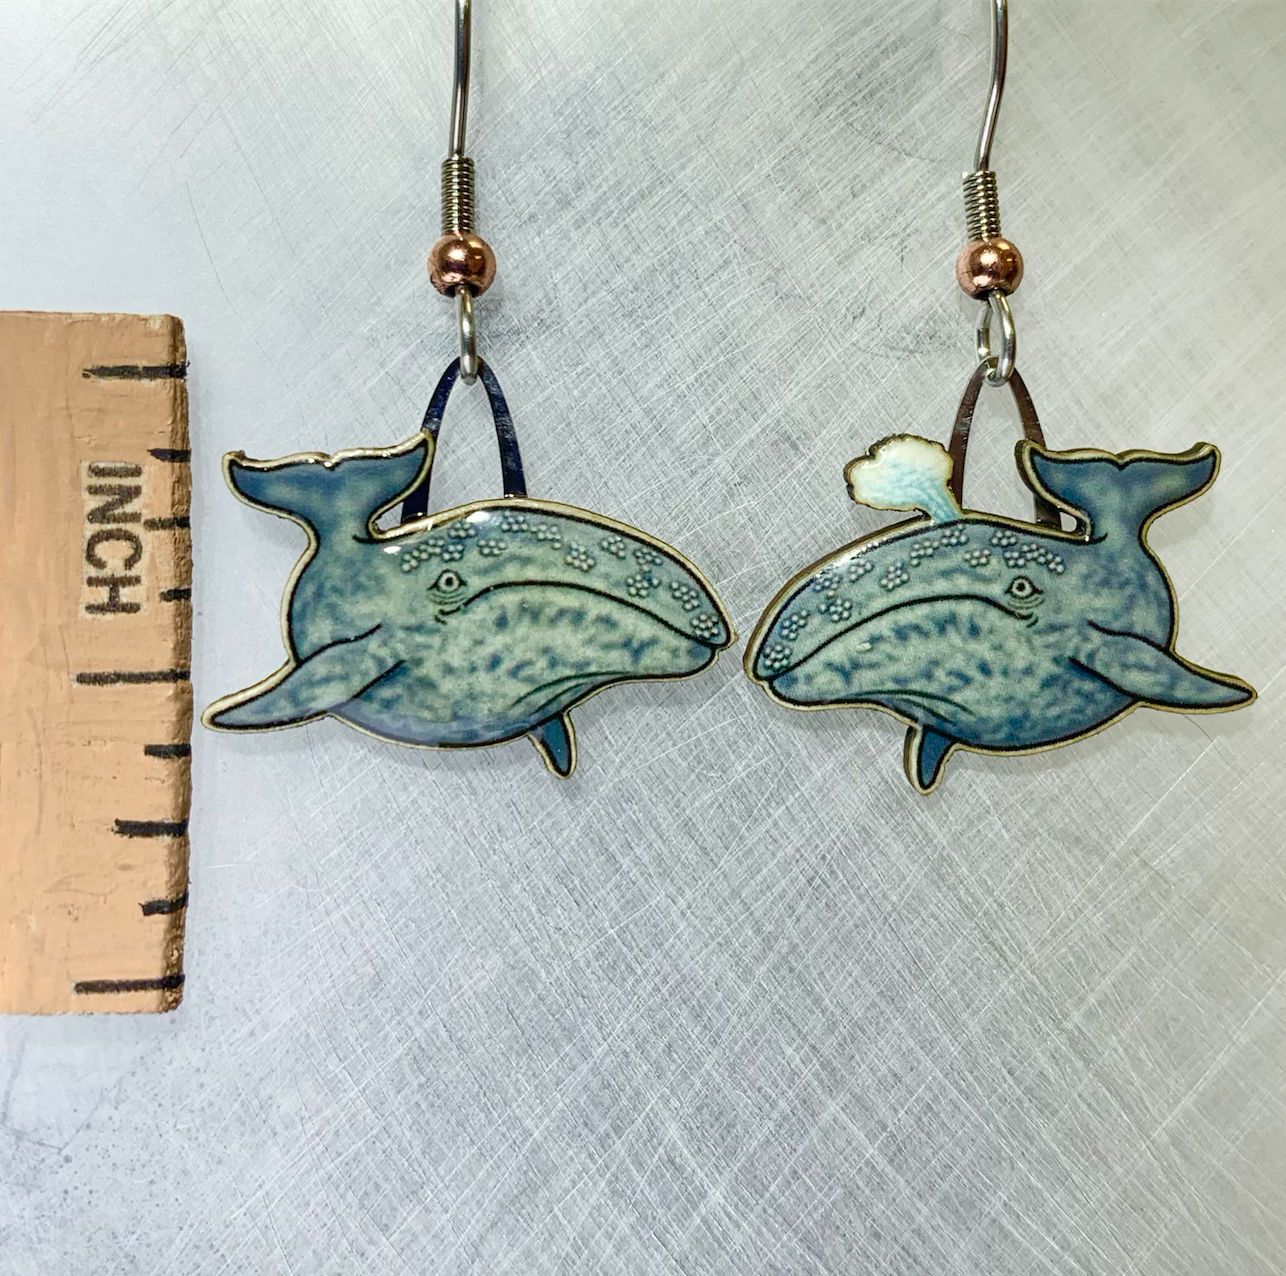 Picture shown is of 1 inch tall pair of earrings of the marine animal the Gray Whale.